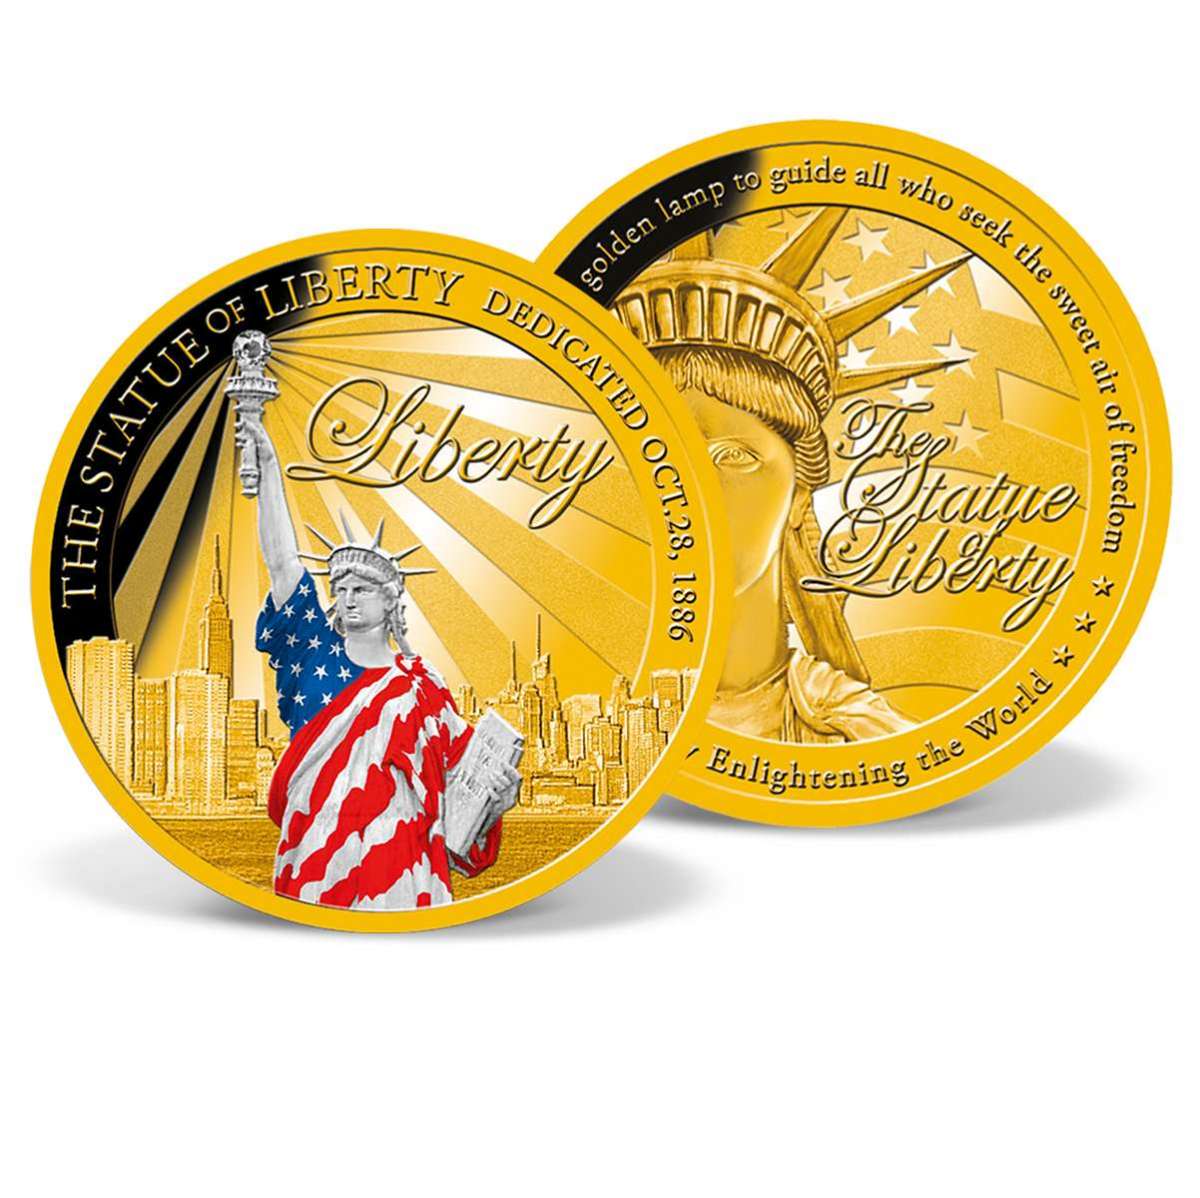 Colossal Statue of Liberty Commemorative Coin | Gold ...